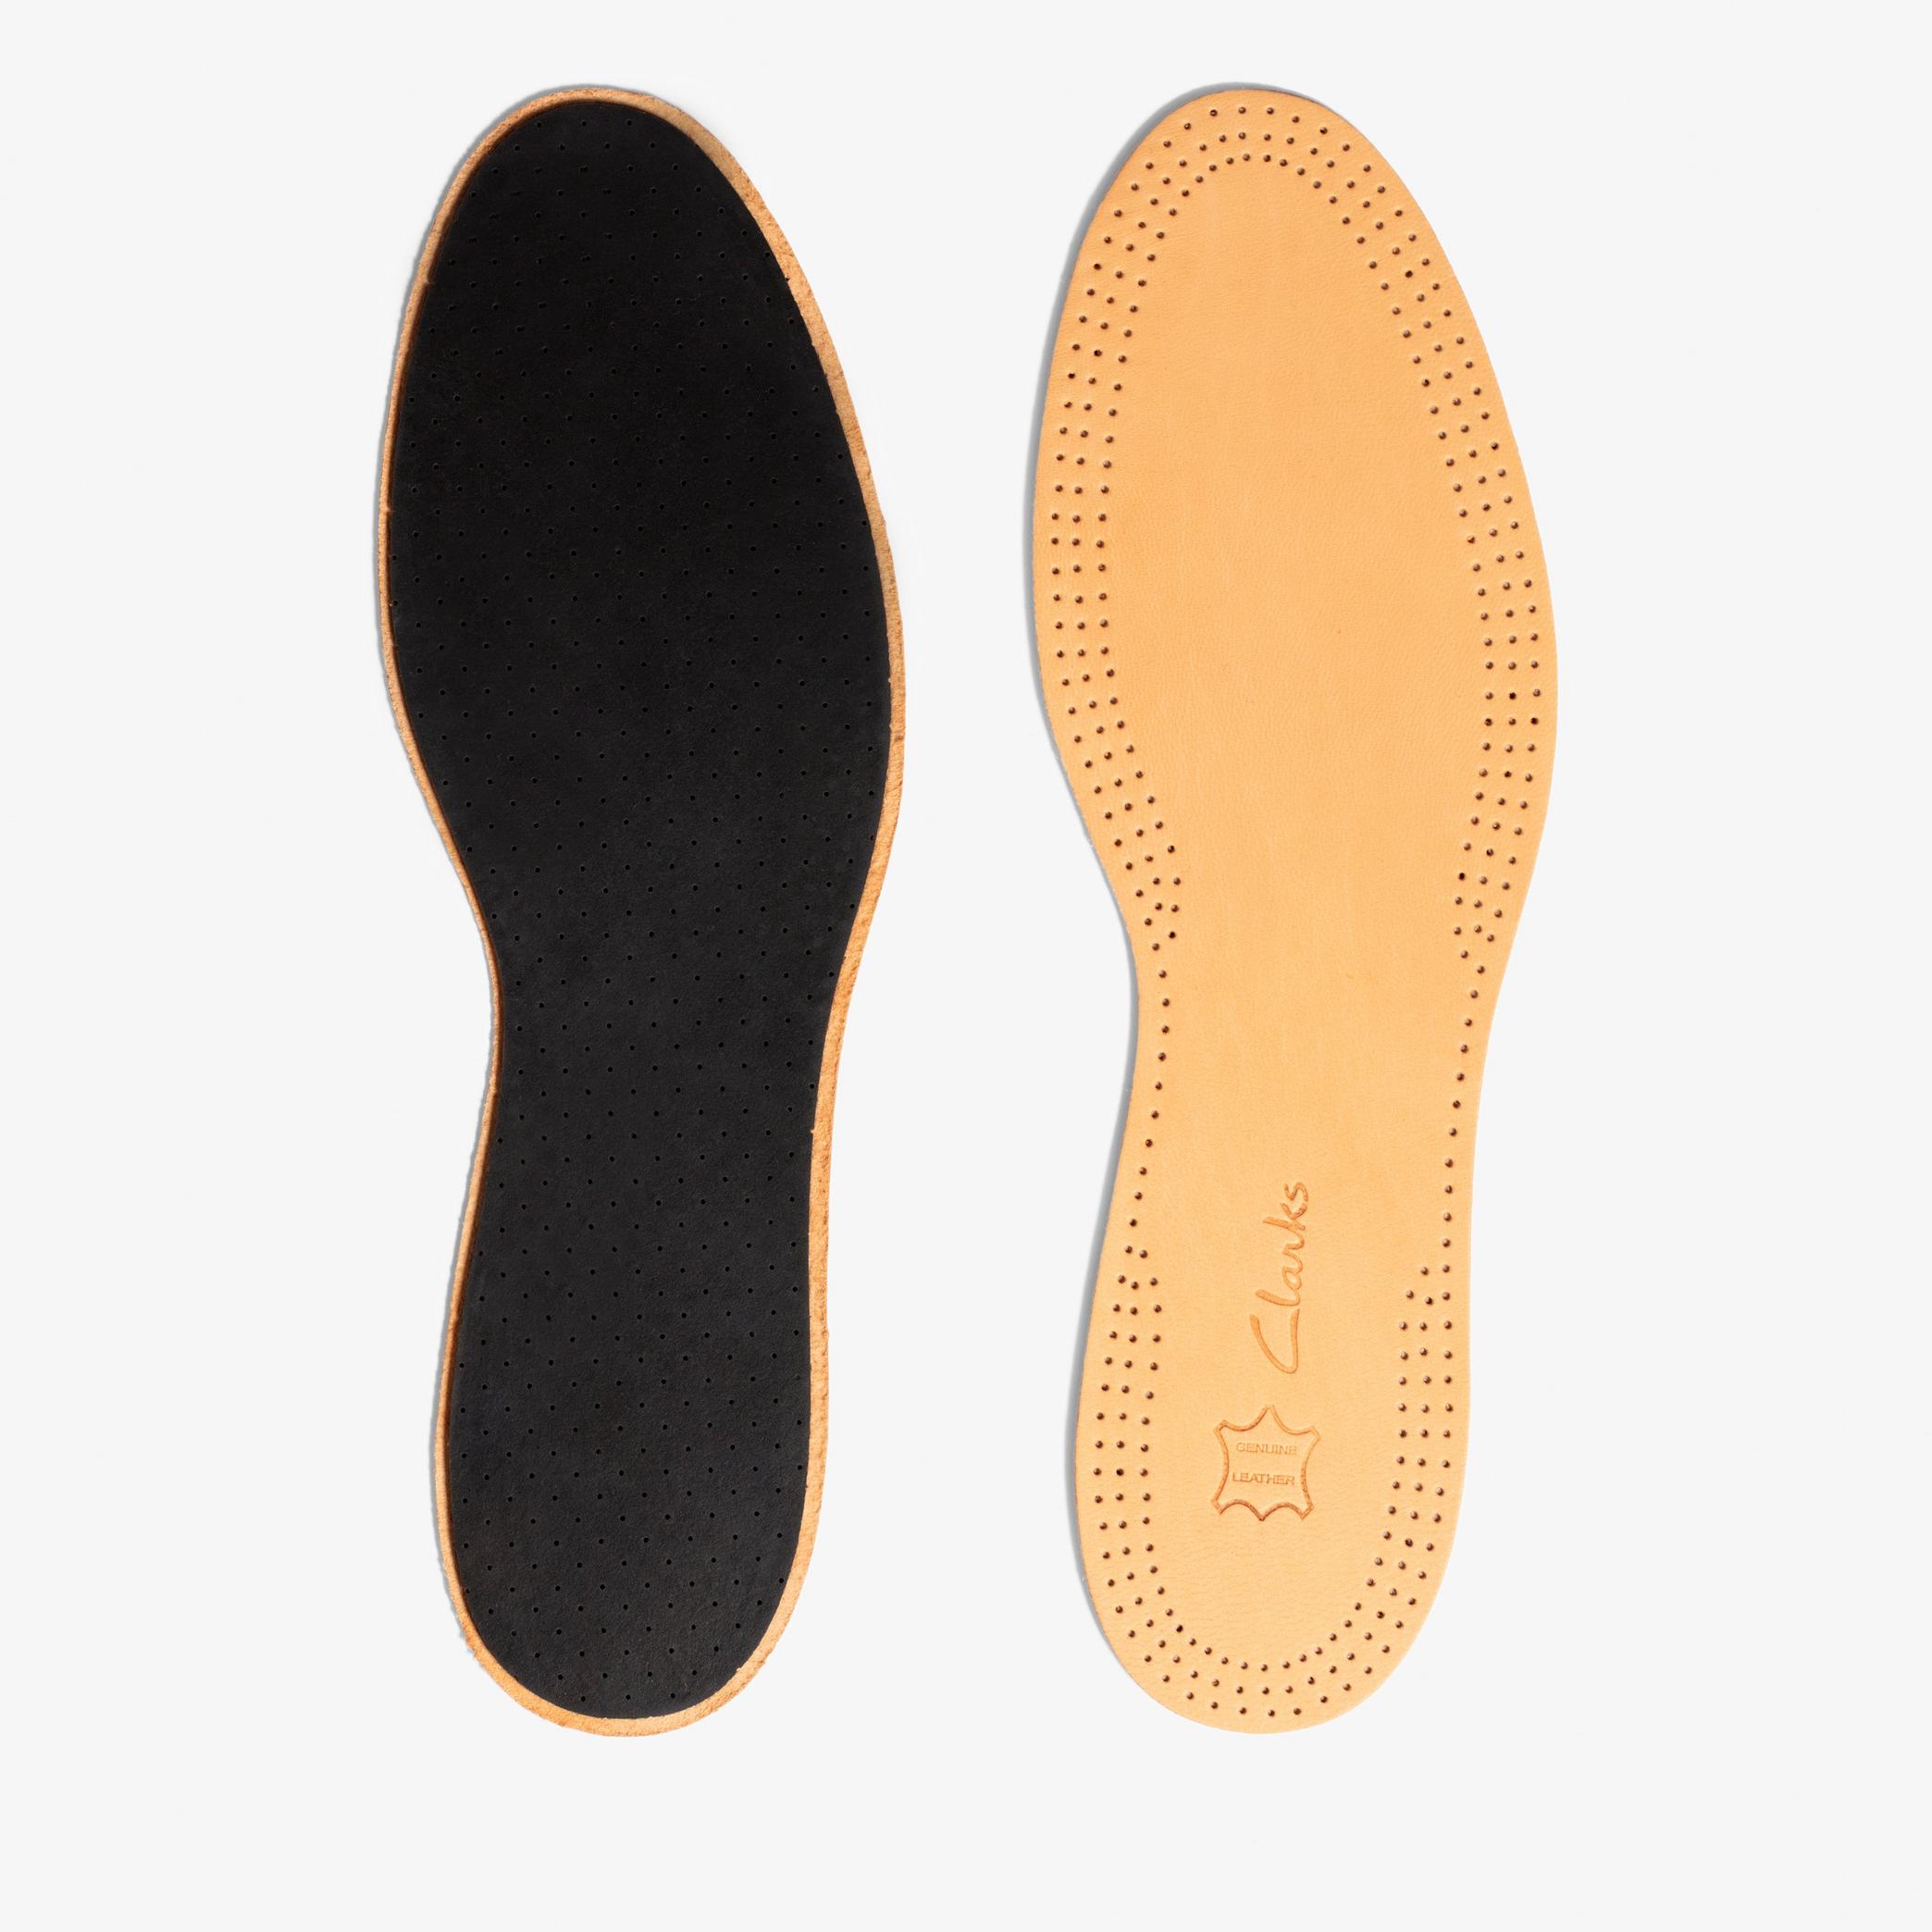 Leather insole size 8  Insoles, view 2 of 3